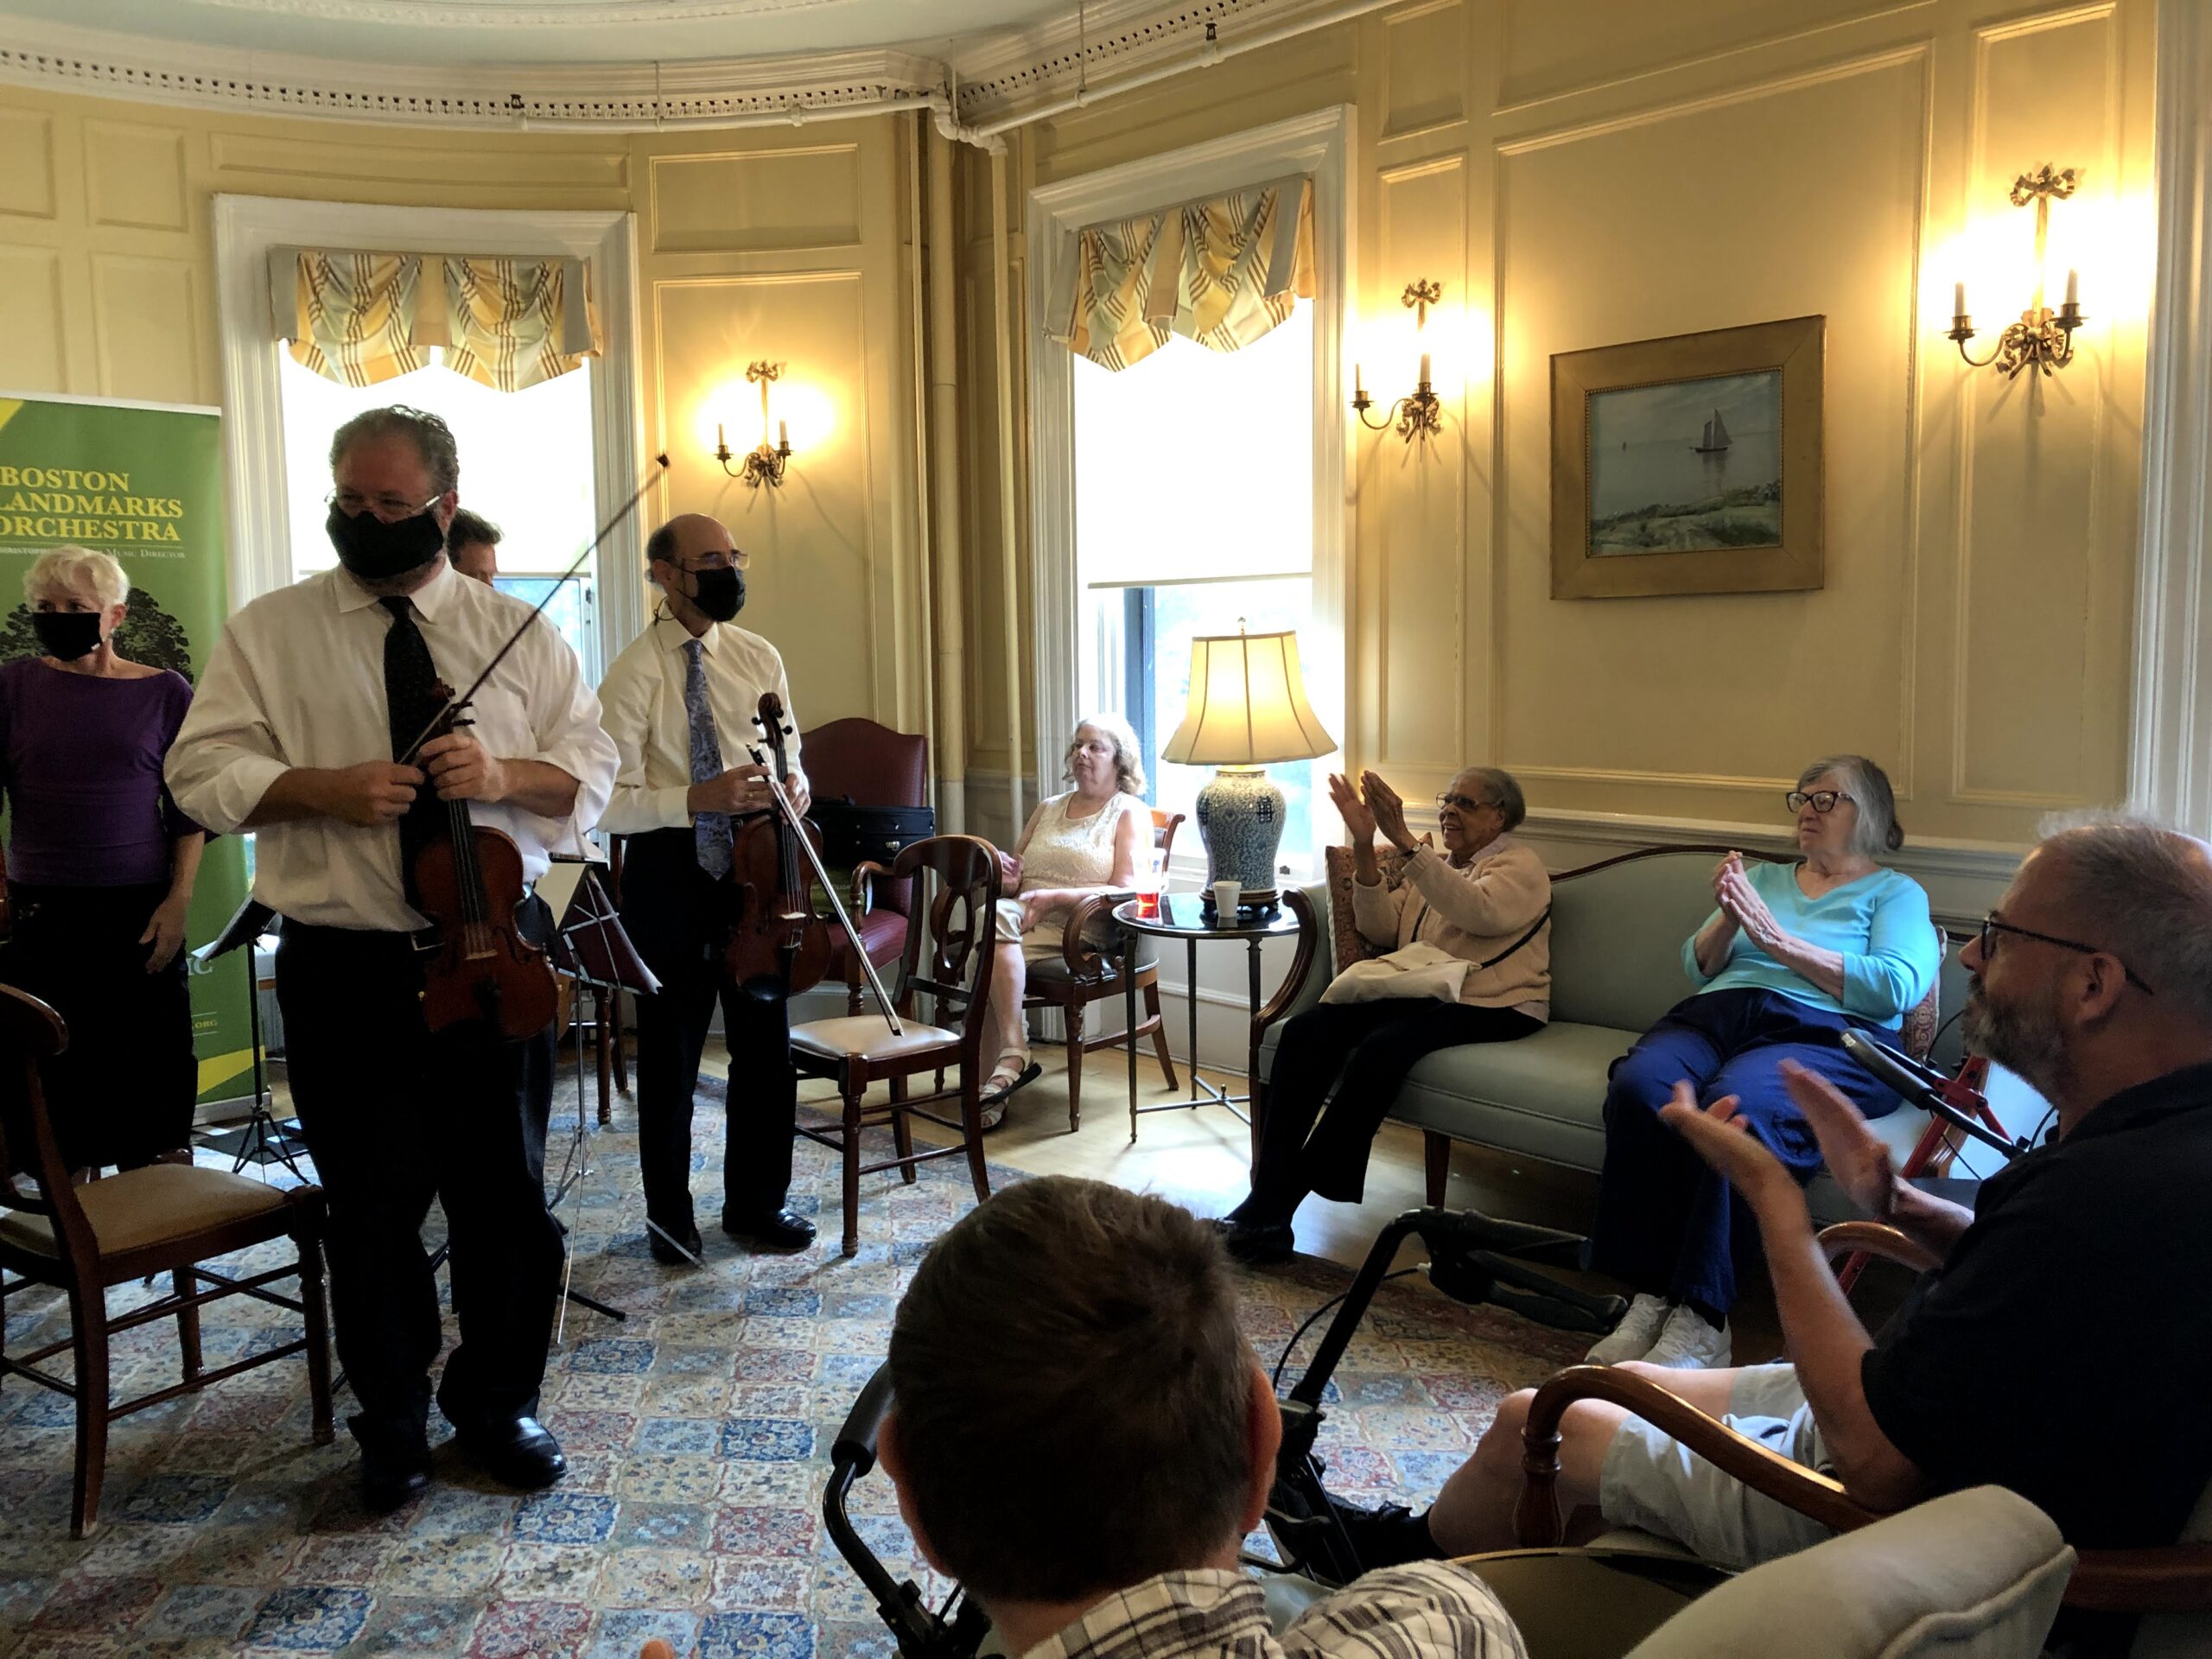 Member's of Landmarks Orchestra's string quartet stand as residents applaud at a Music and Memory concert.